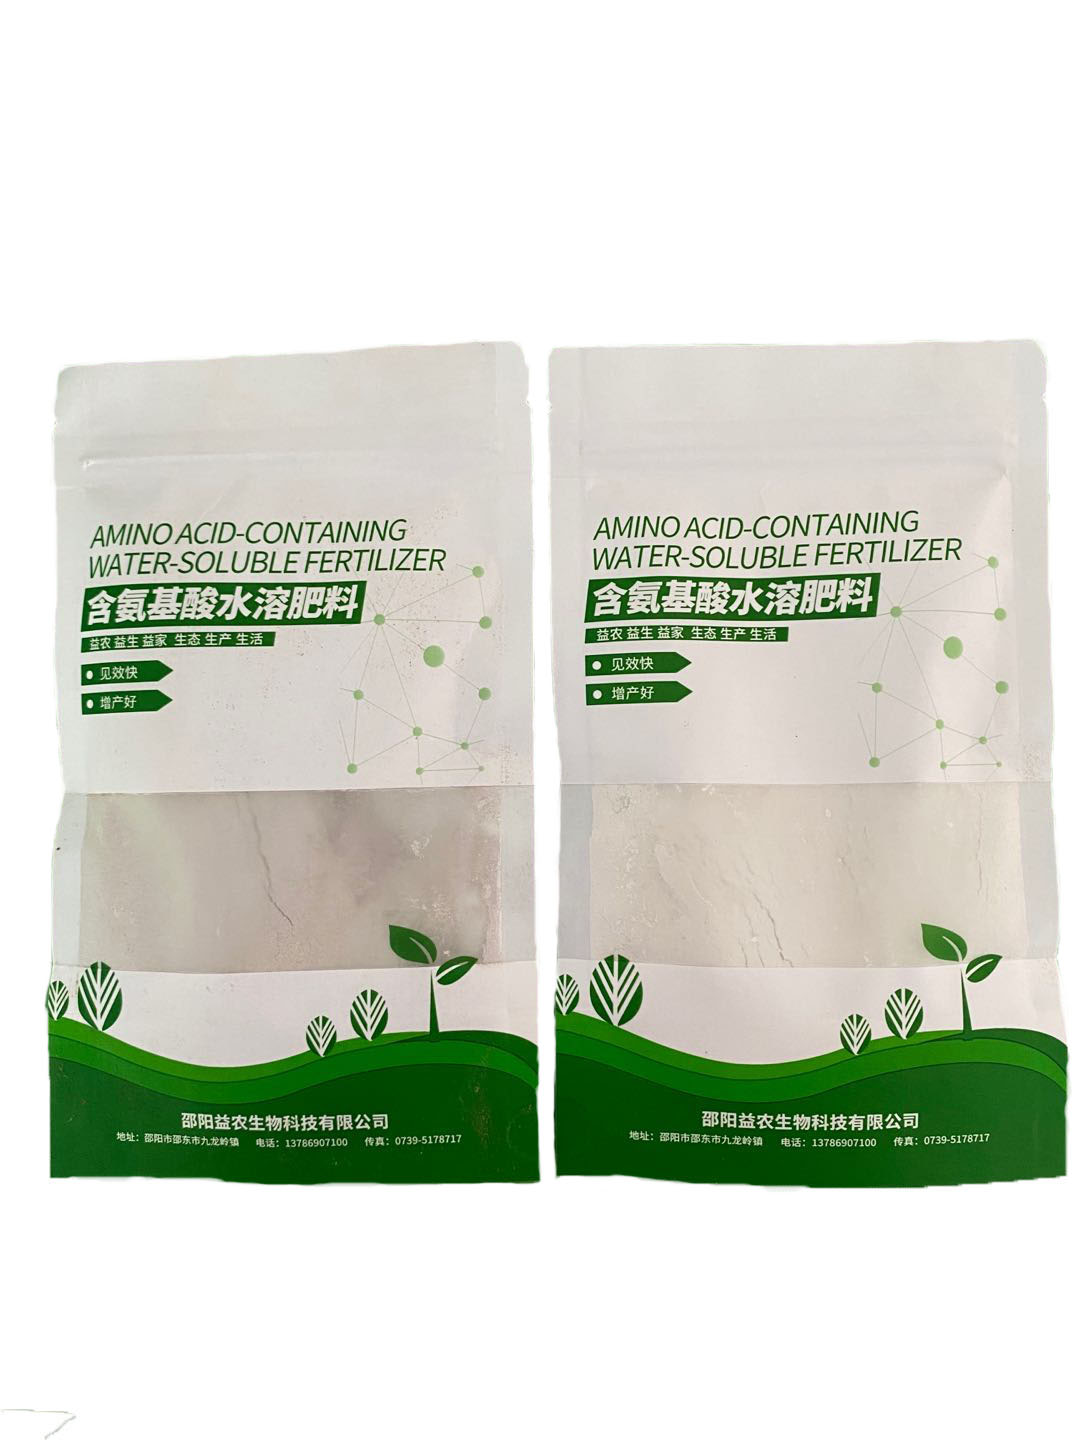     Water-soluble fertilizer (powder) containing amino acids